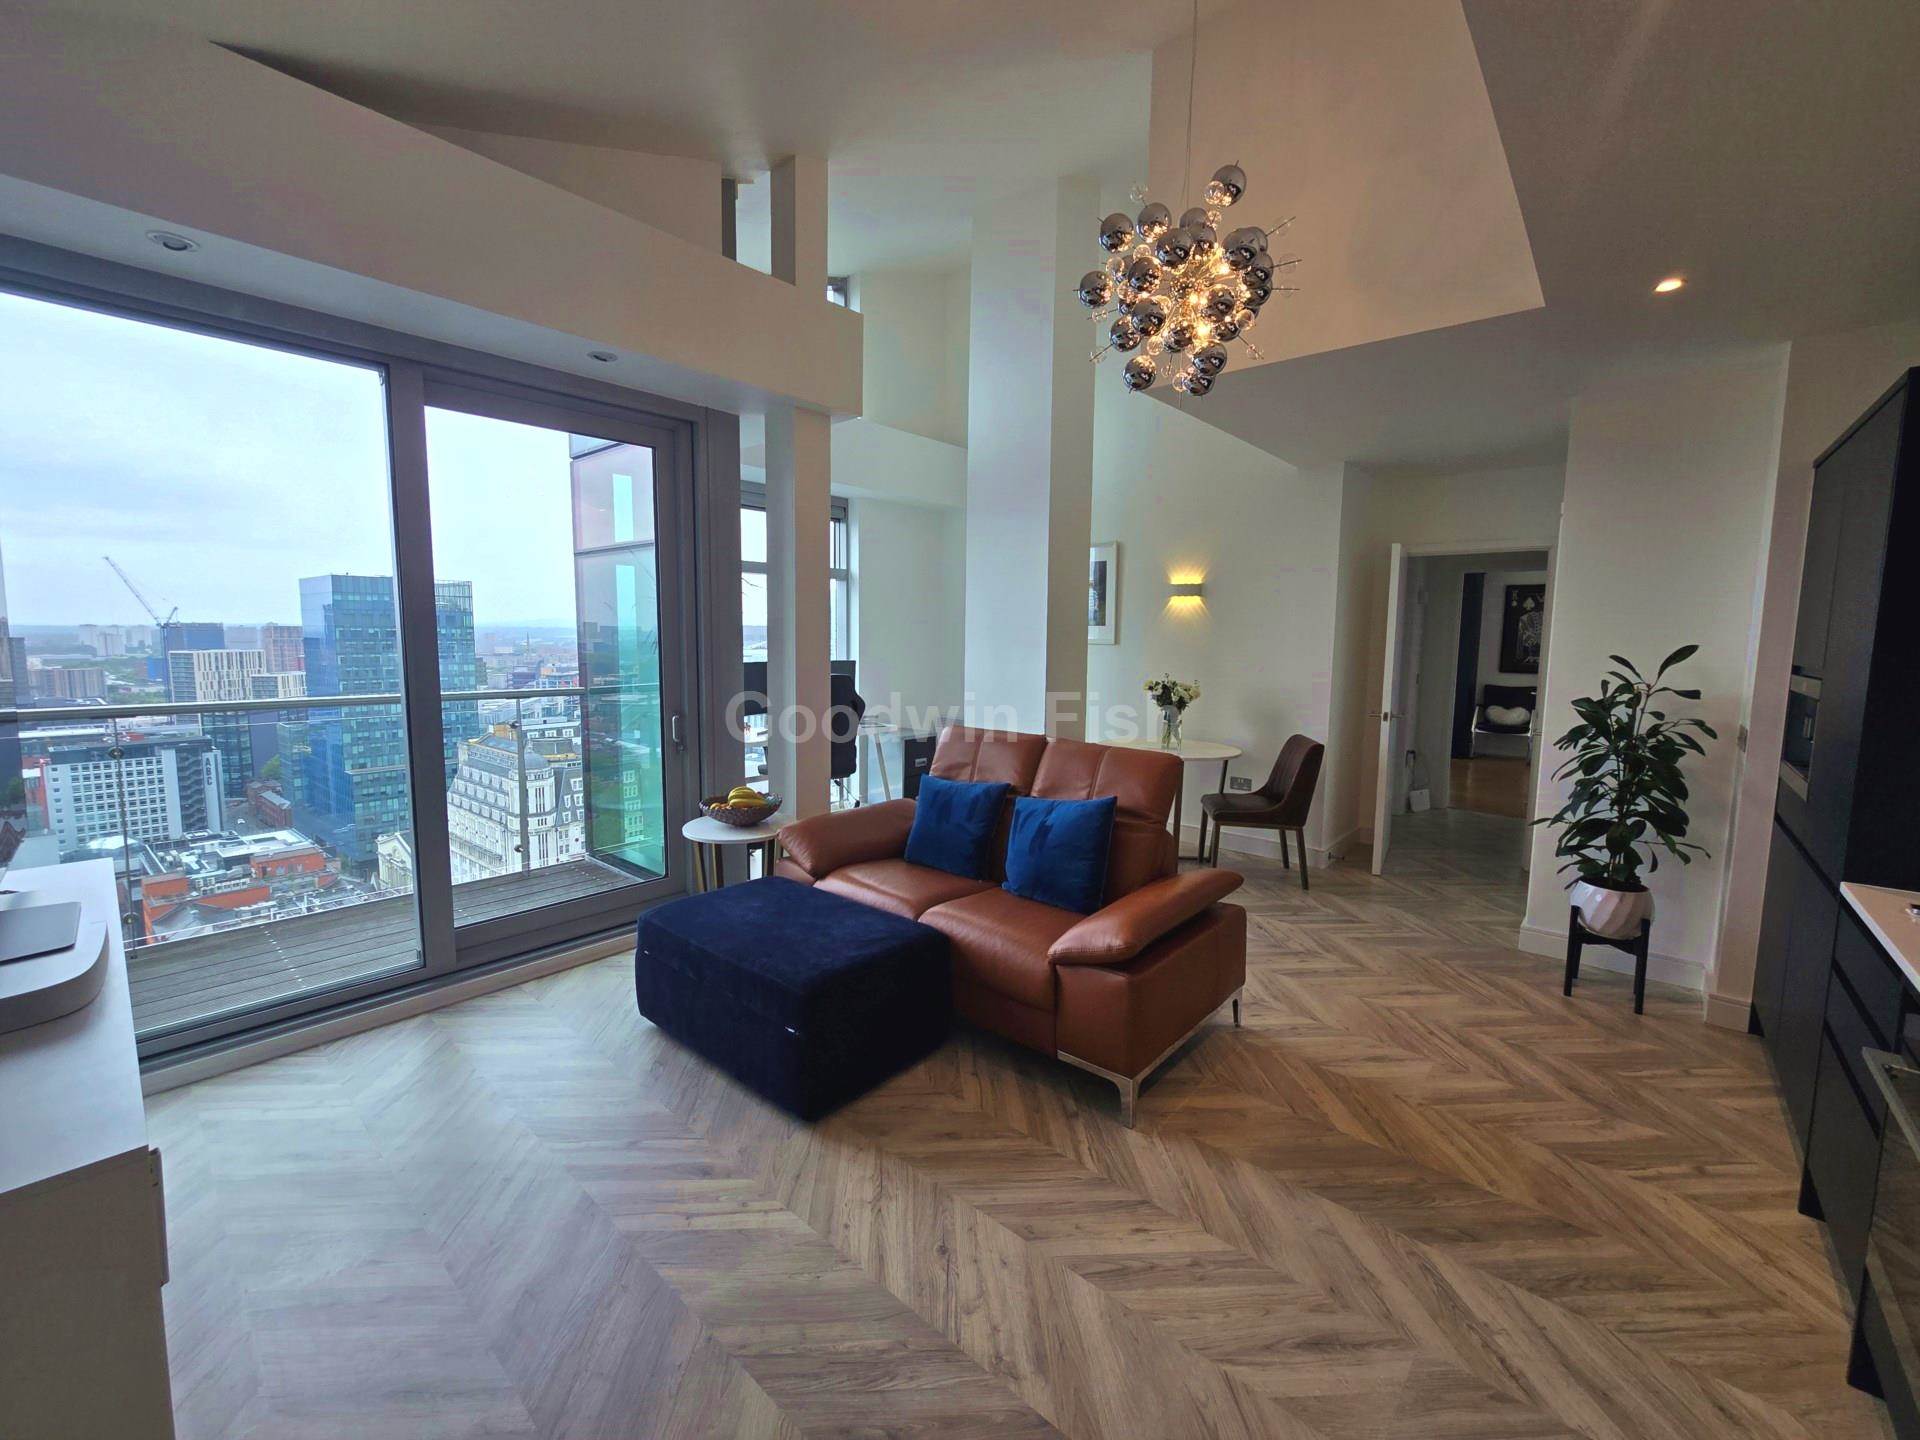 2 bed Apartment for rent in Manchester. From Goodwin Fish & Co - Manchester